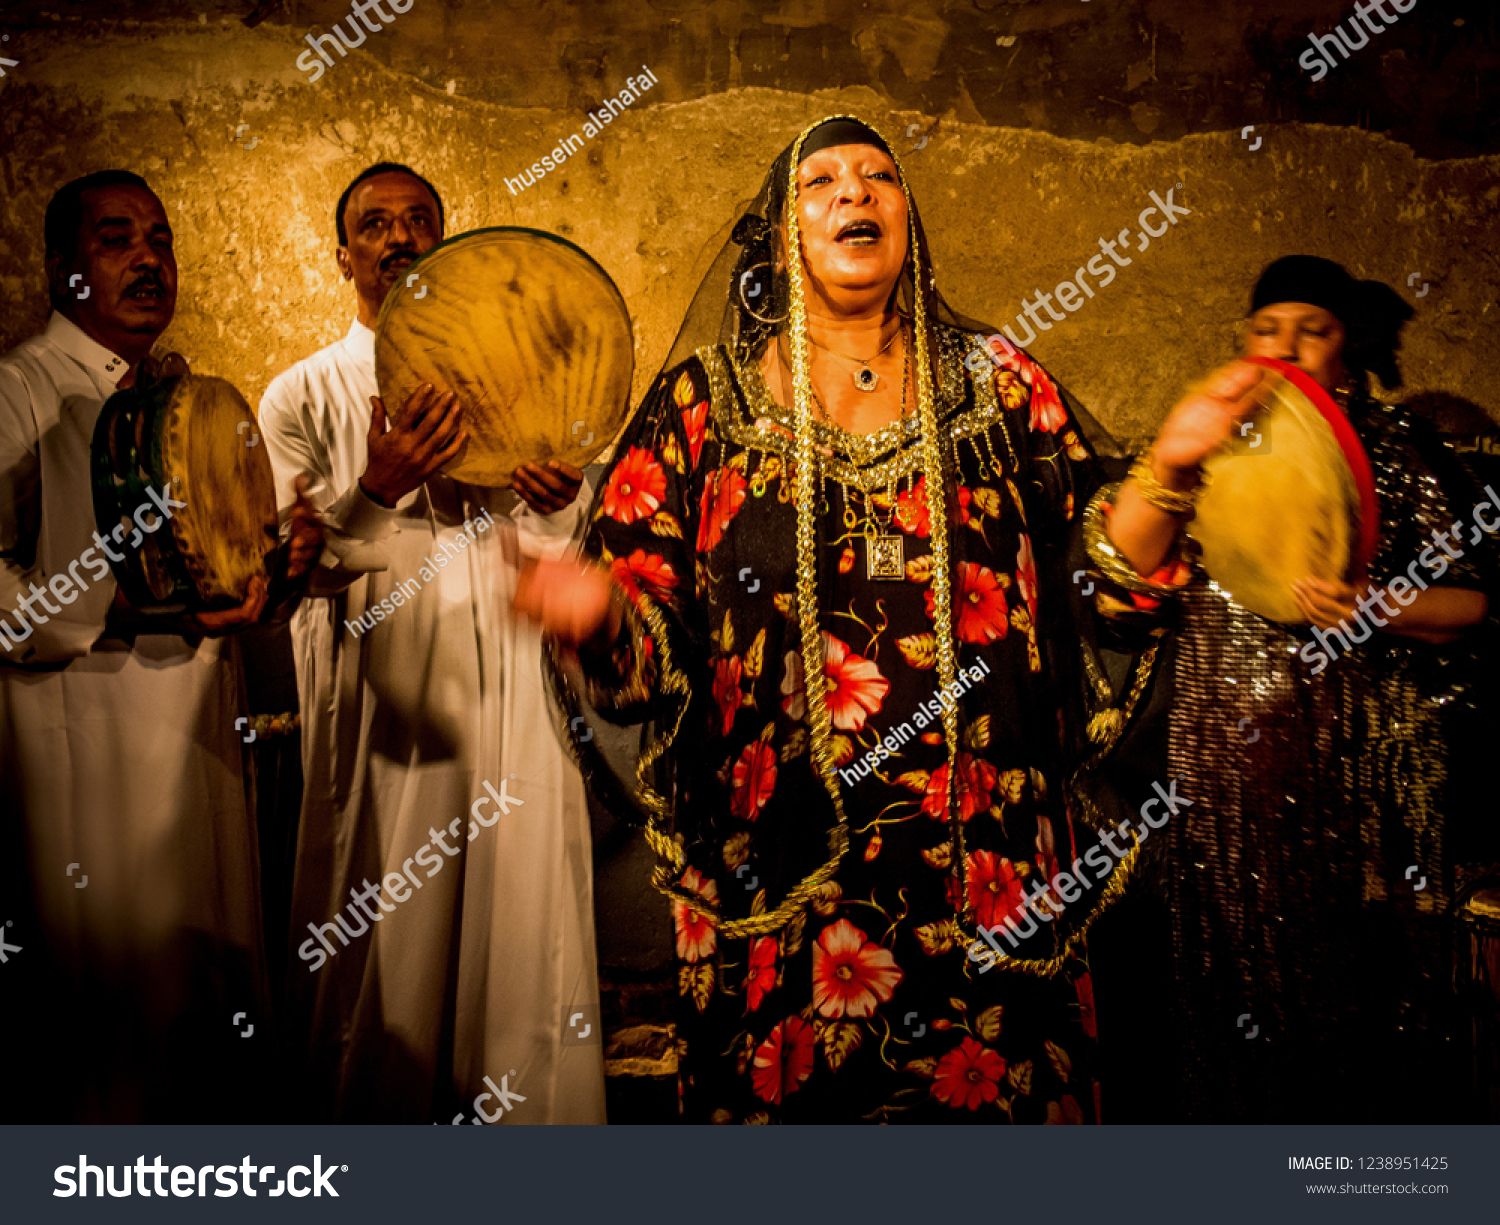 A band performing folk dances from folklore, Egypt, August 2104 #1238951425